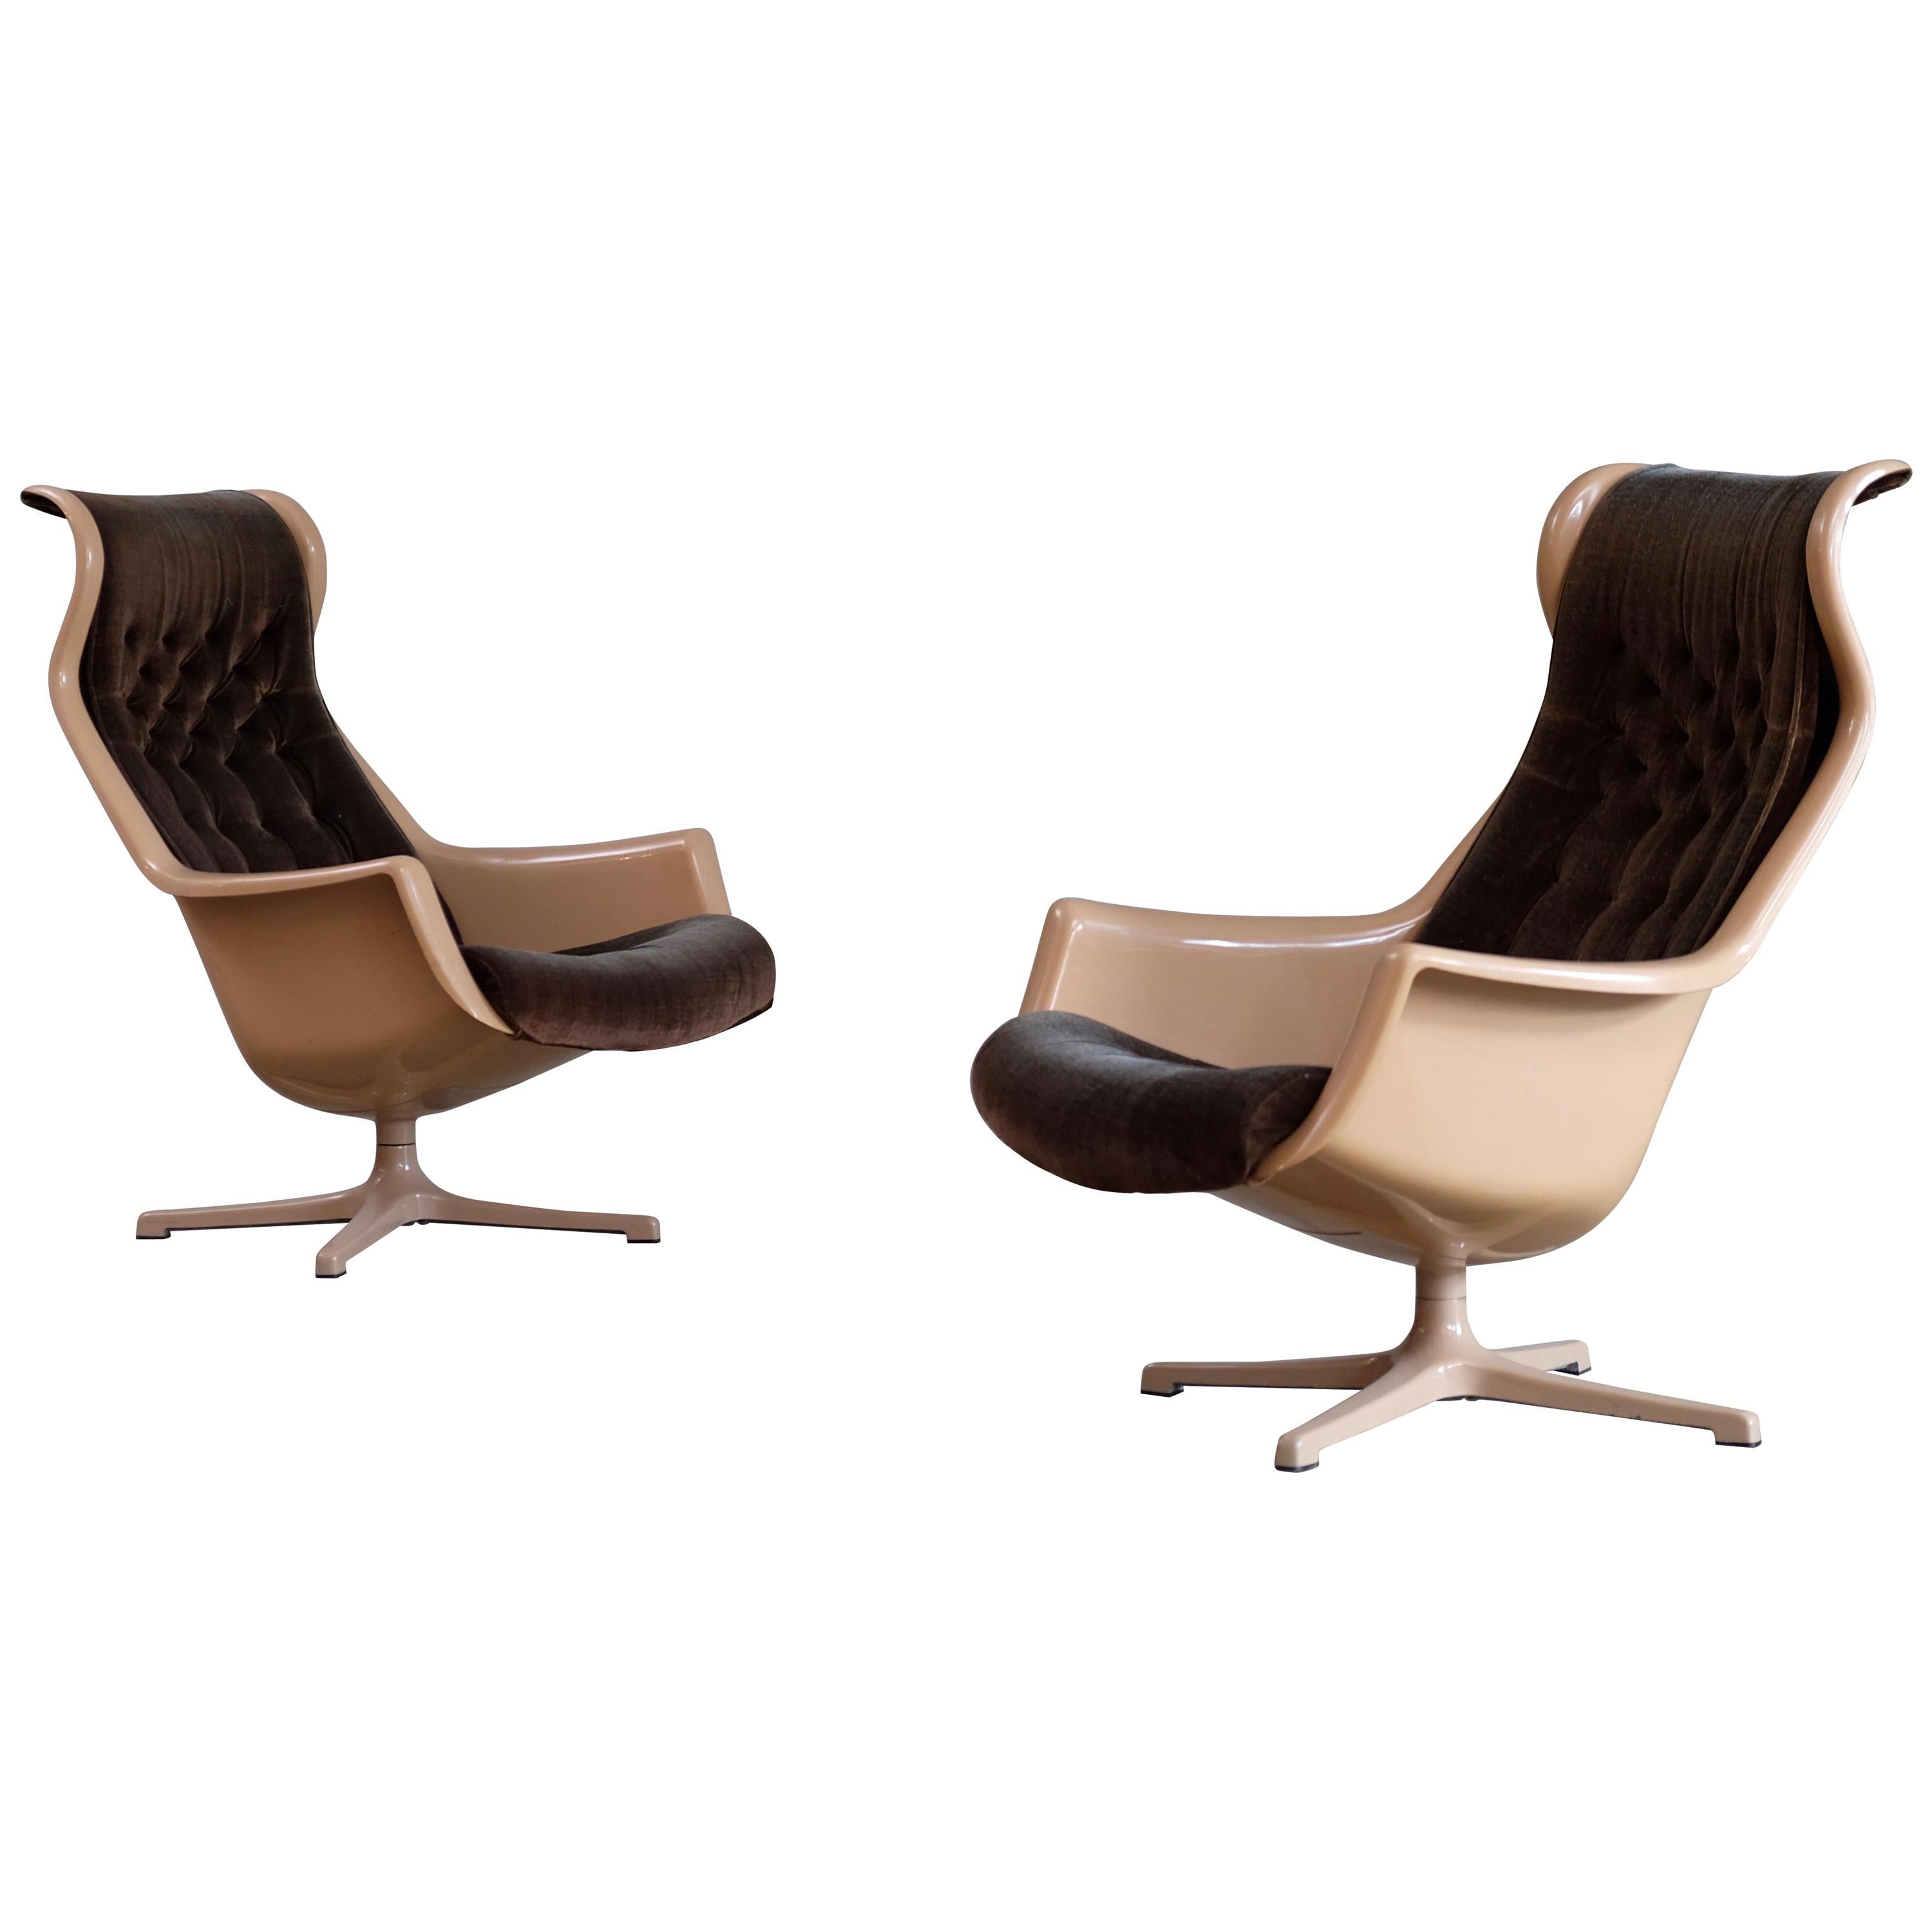 Pair of "Galaxy" Armchairs by Alf Svensson for DUX, 1970s